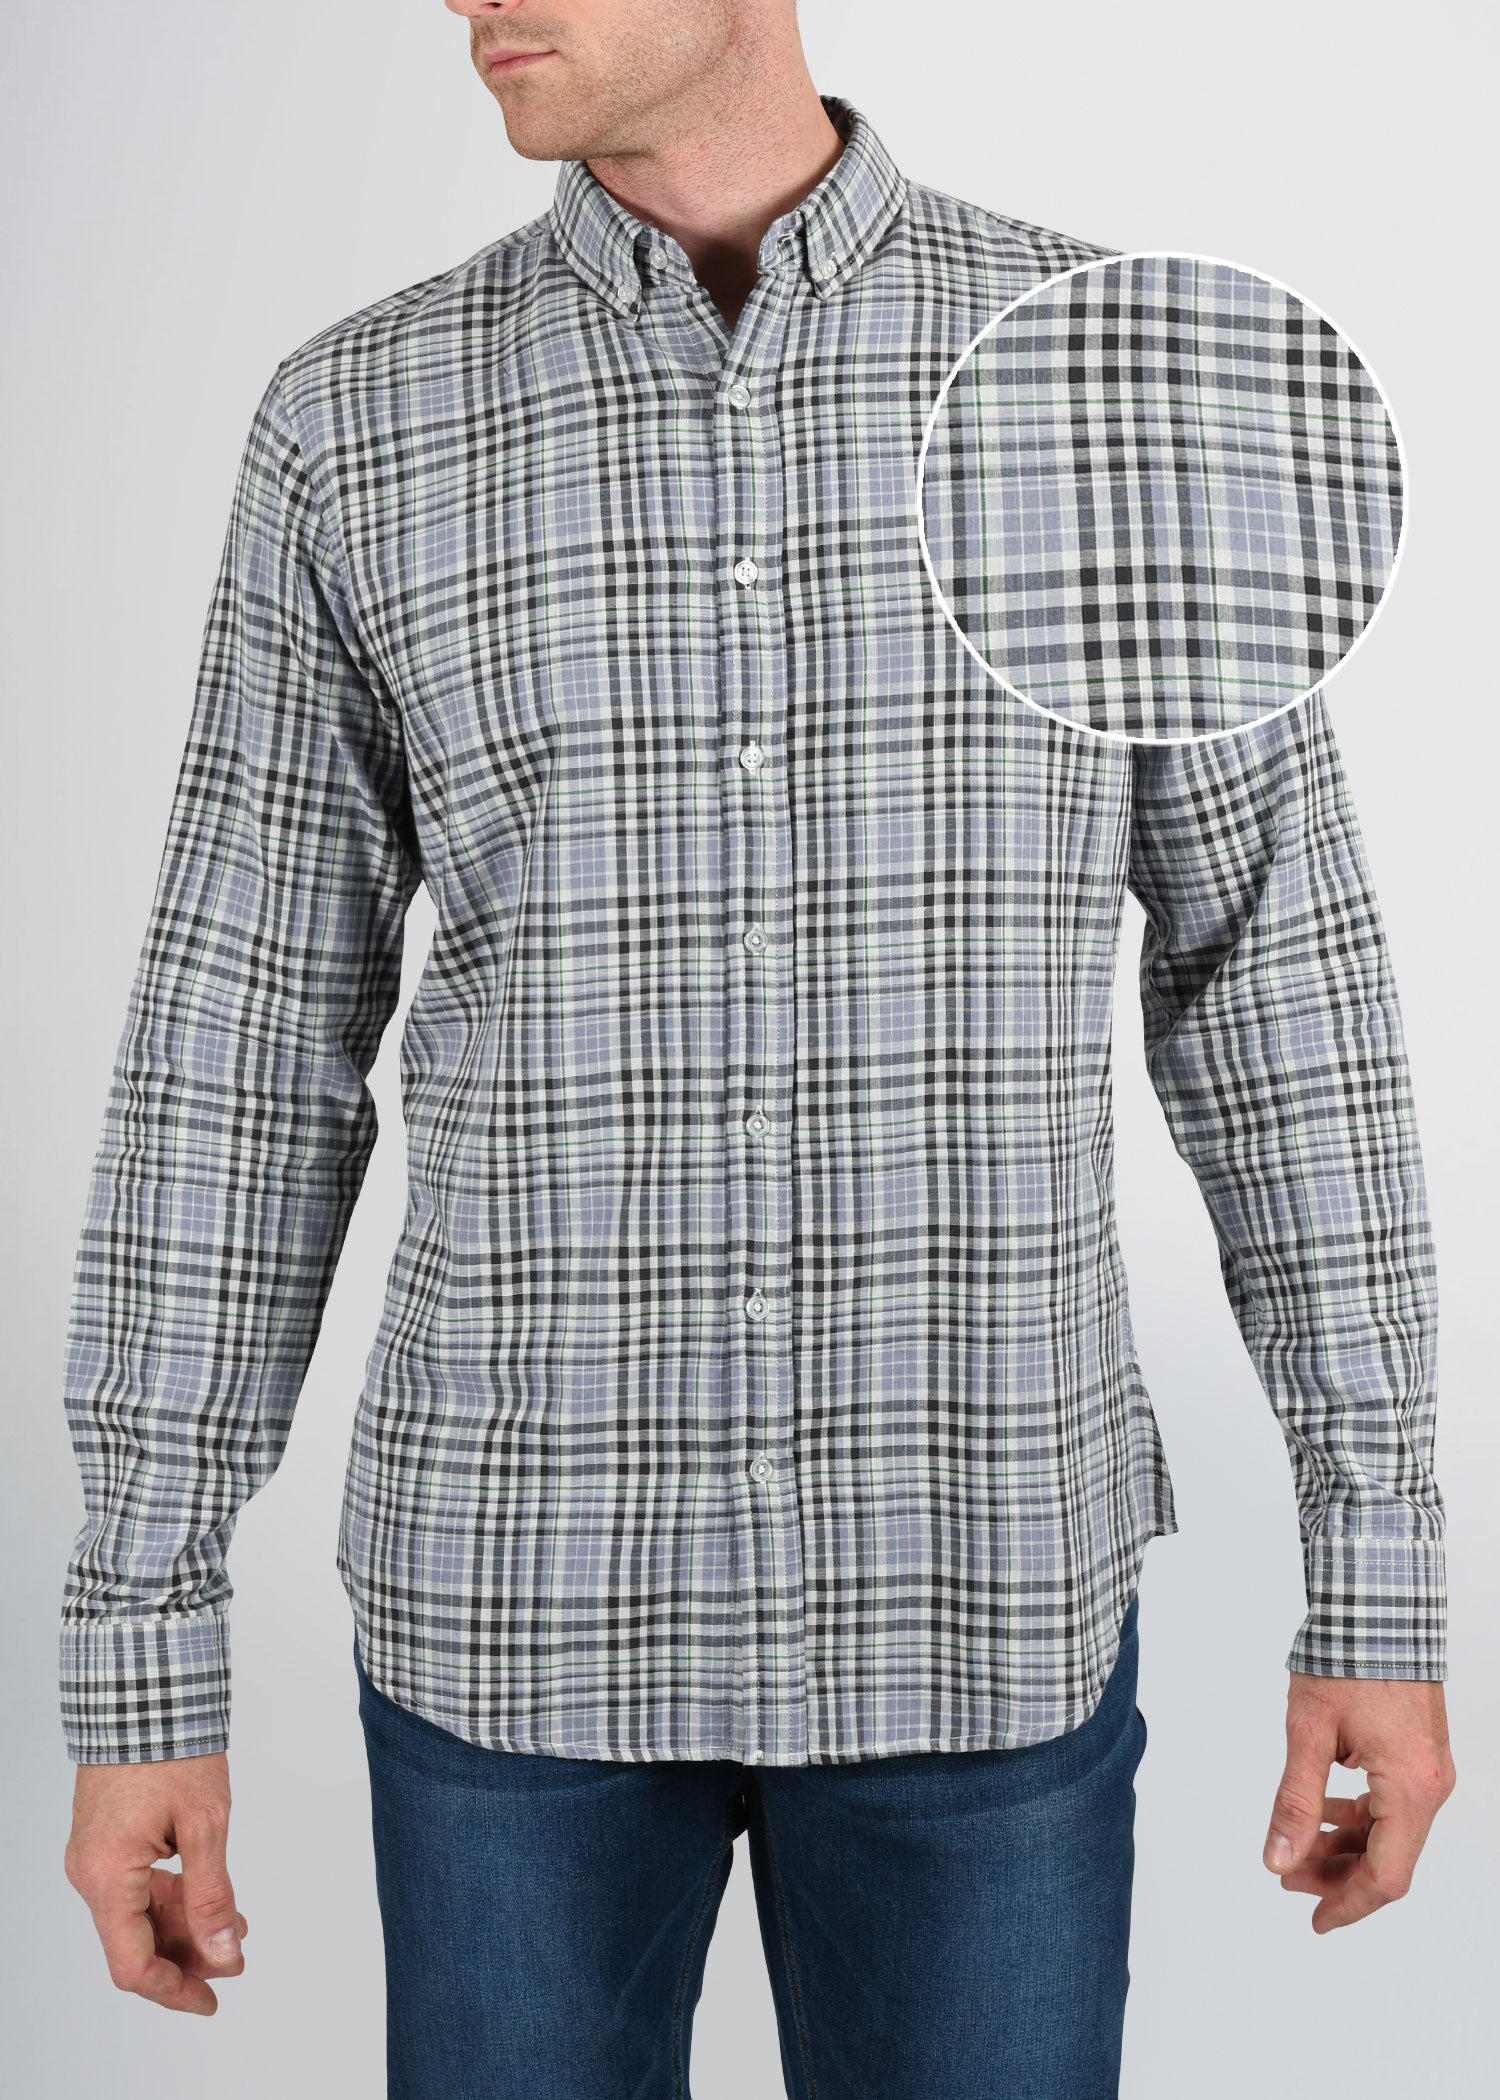 Double-Weave Tall Button-ups Shirts for Tall Men